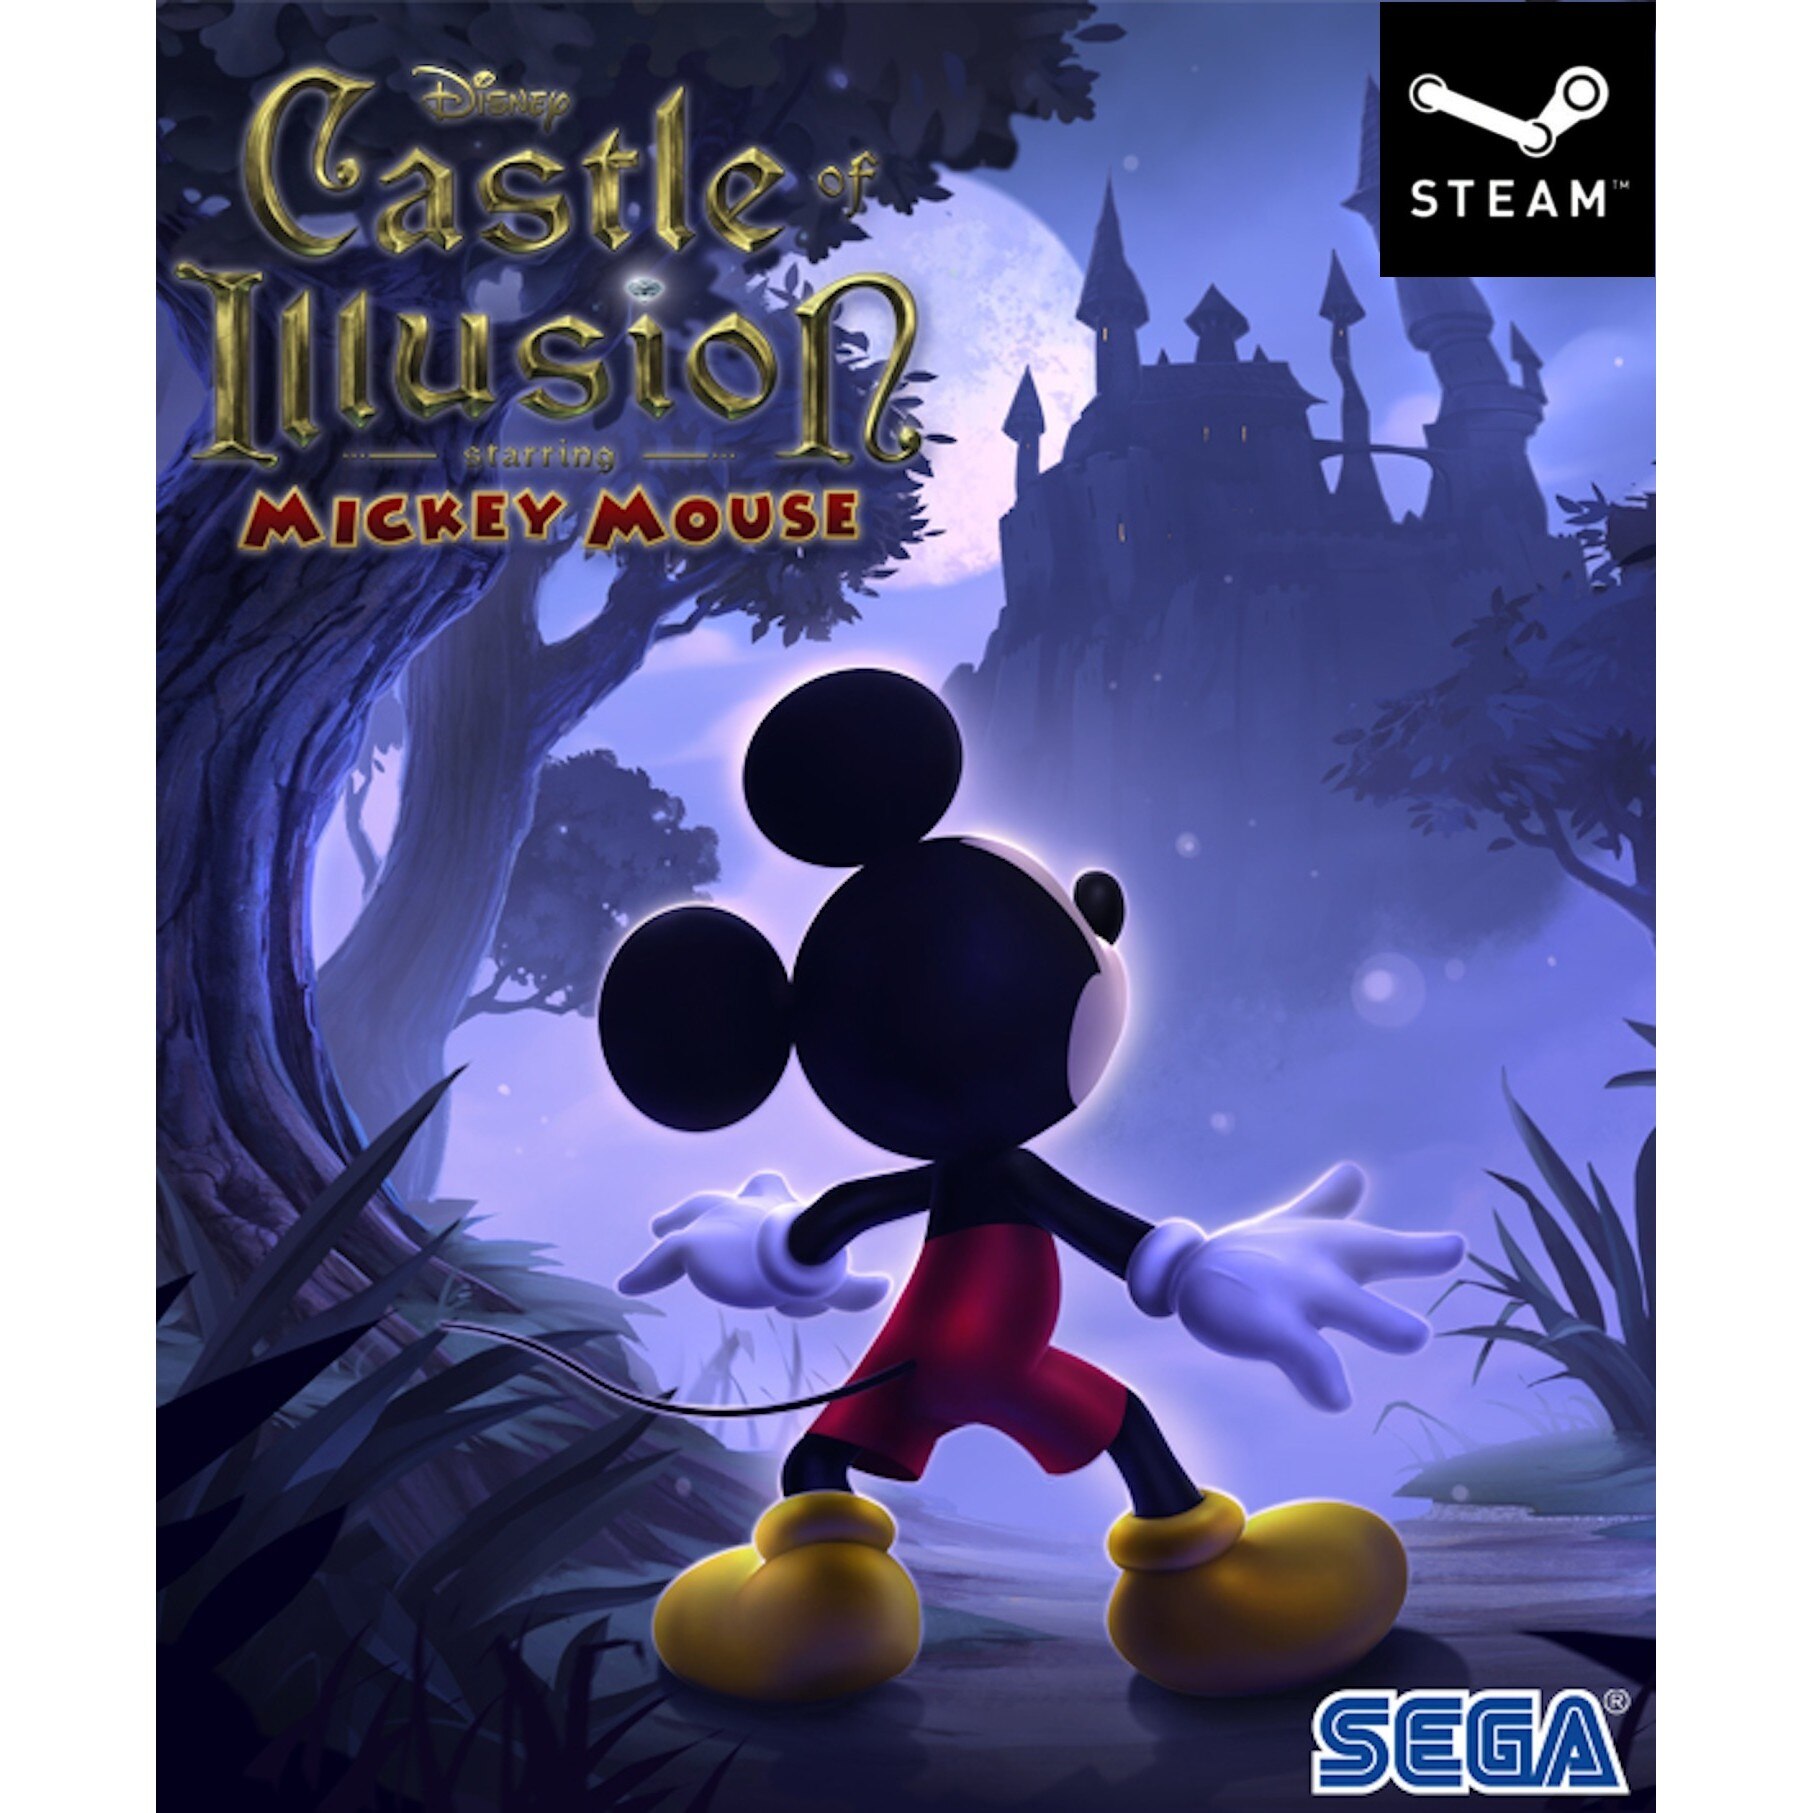 Castle of illusion starring mickey mouse pc